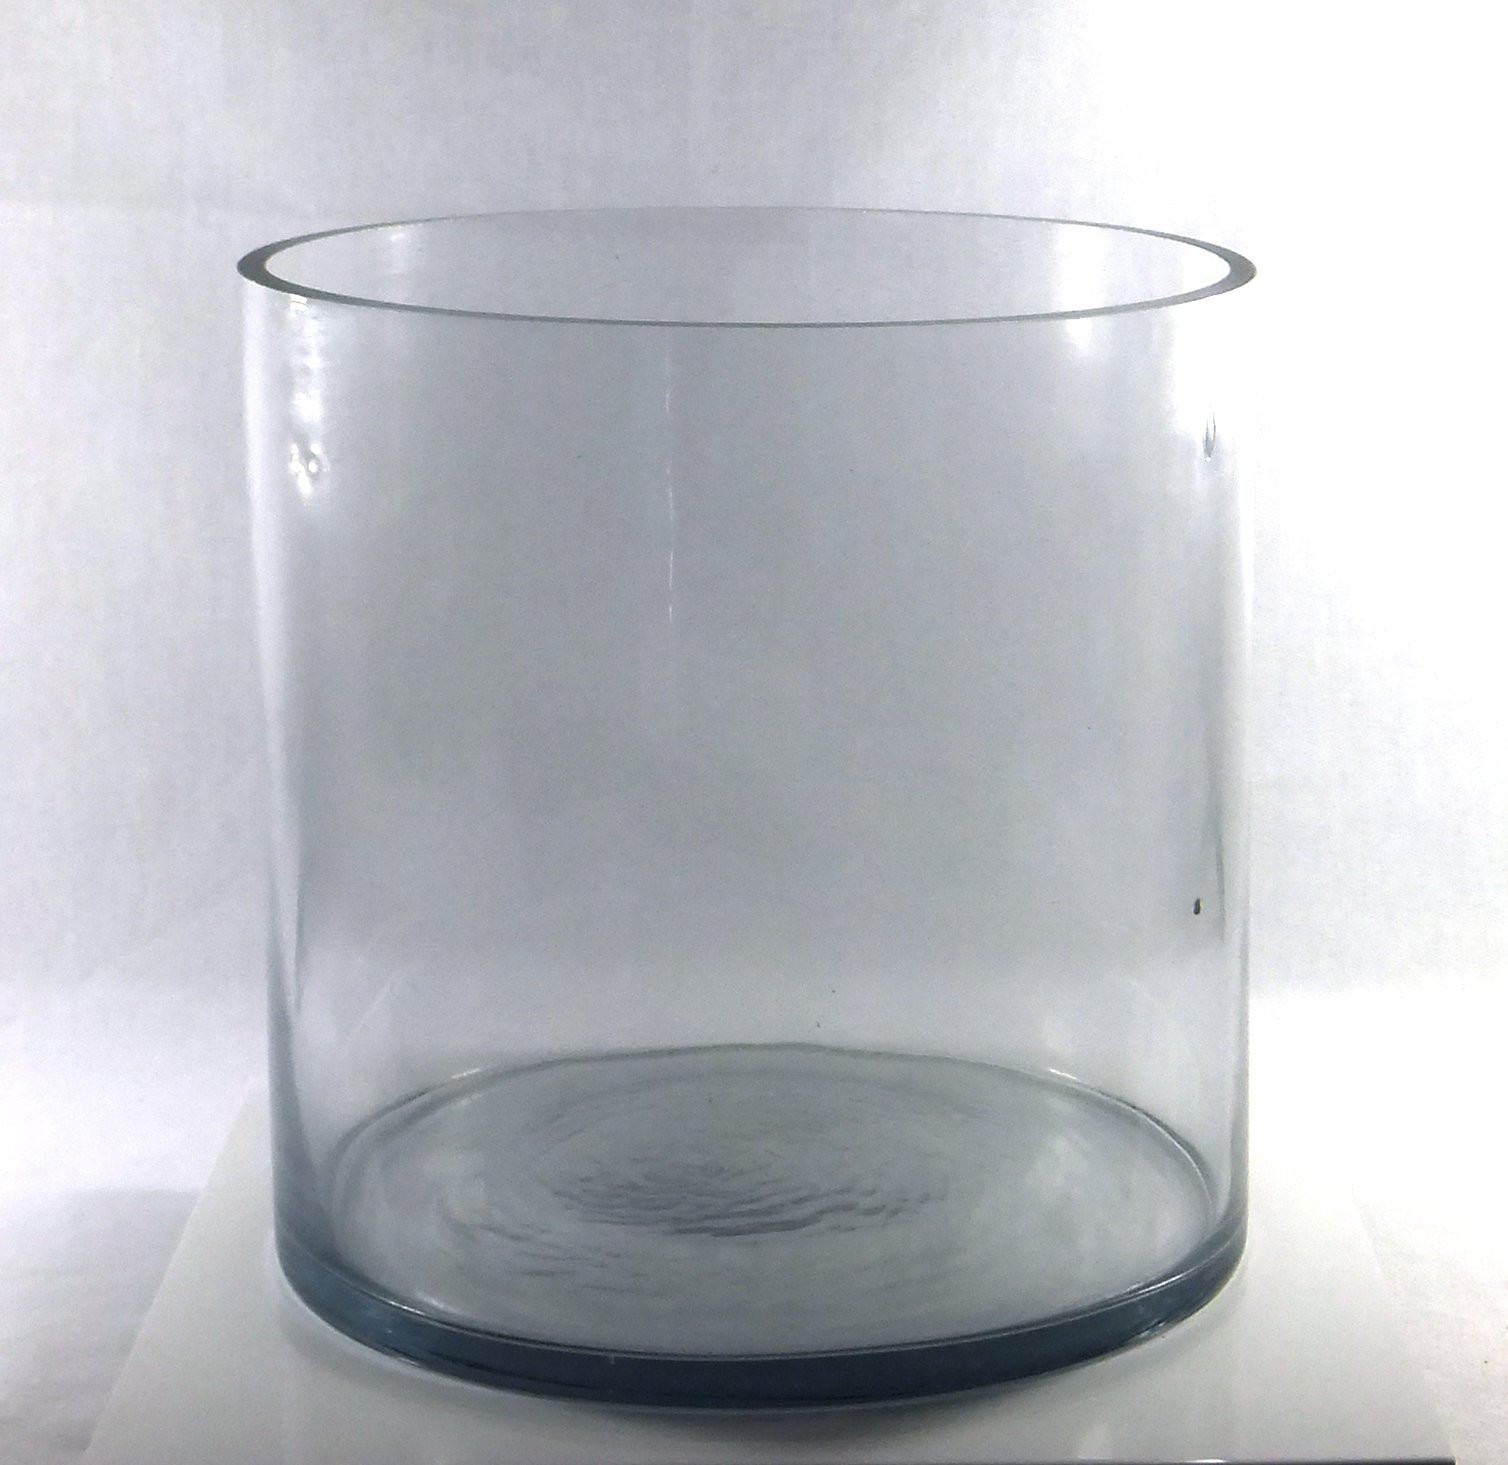 24 Amazing 8 Inch Glass Vase 2024 free download 8 inch glass vase of buy 8 inch round large glass vase 8 clear cylinder oversize with 8 inch round large glass vase 8 clear cylinder oversize centerpiece 8x8